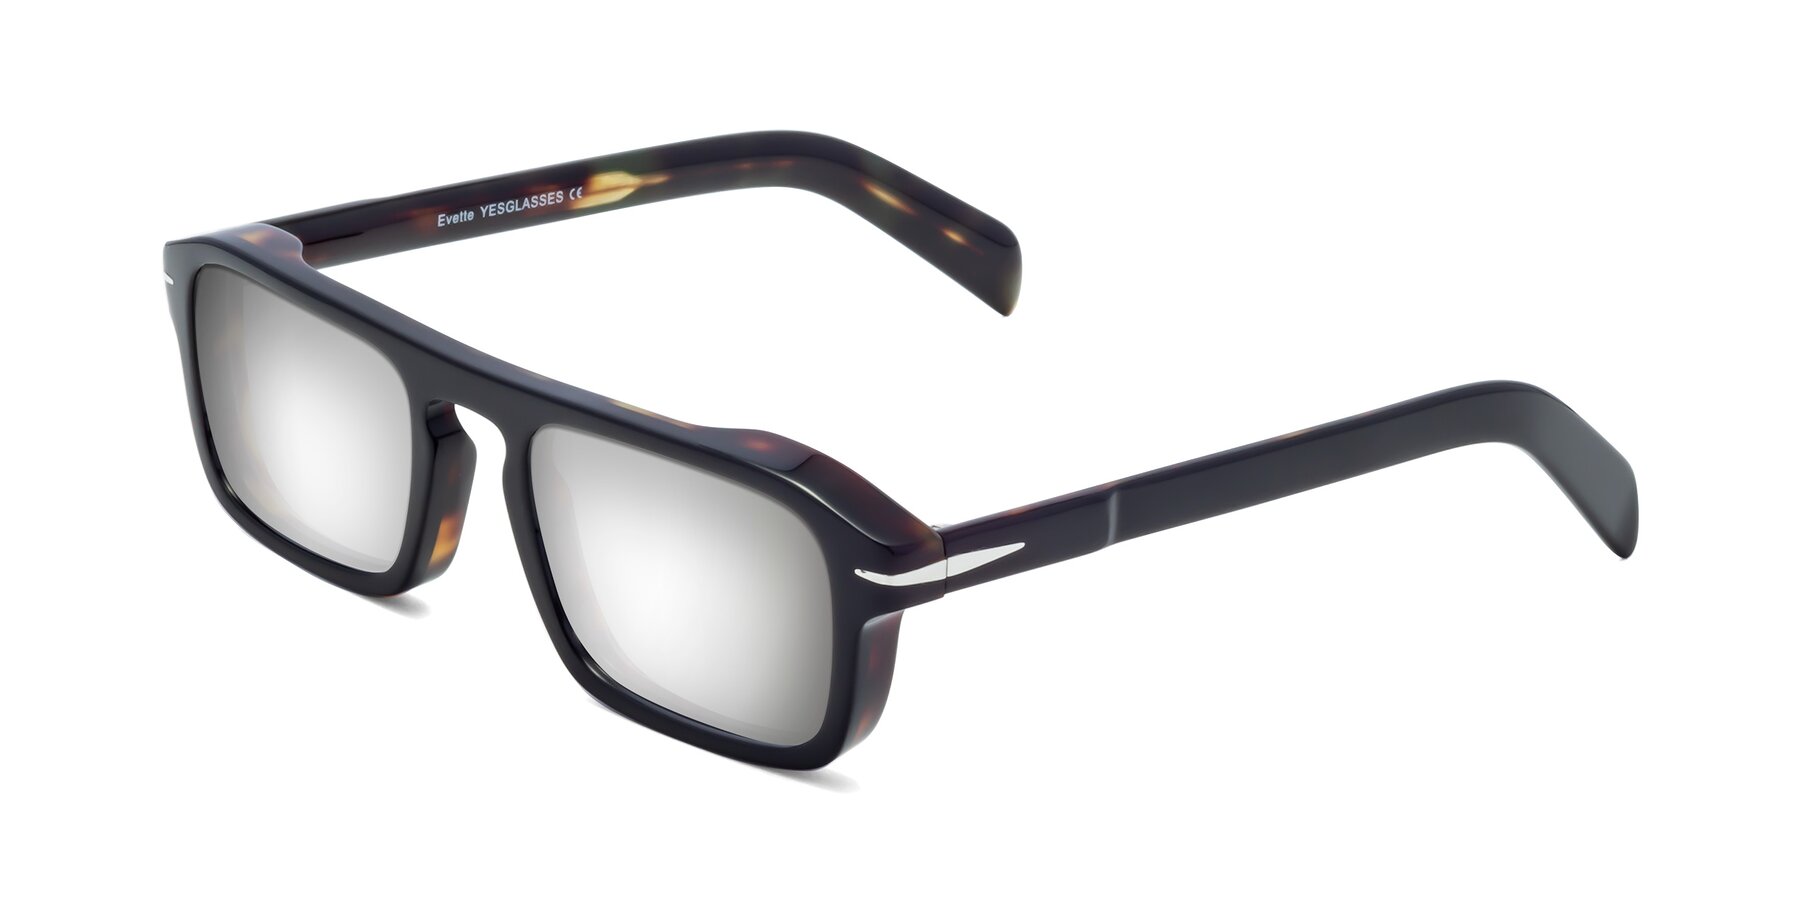 Angle of Evette in Black-Tortoise with Silver Mirrored Lenses